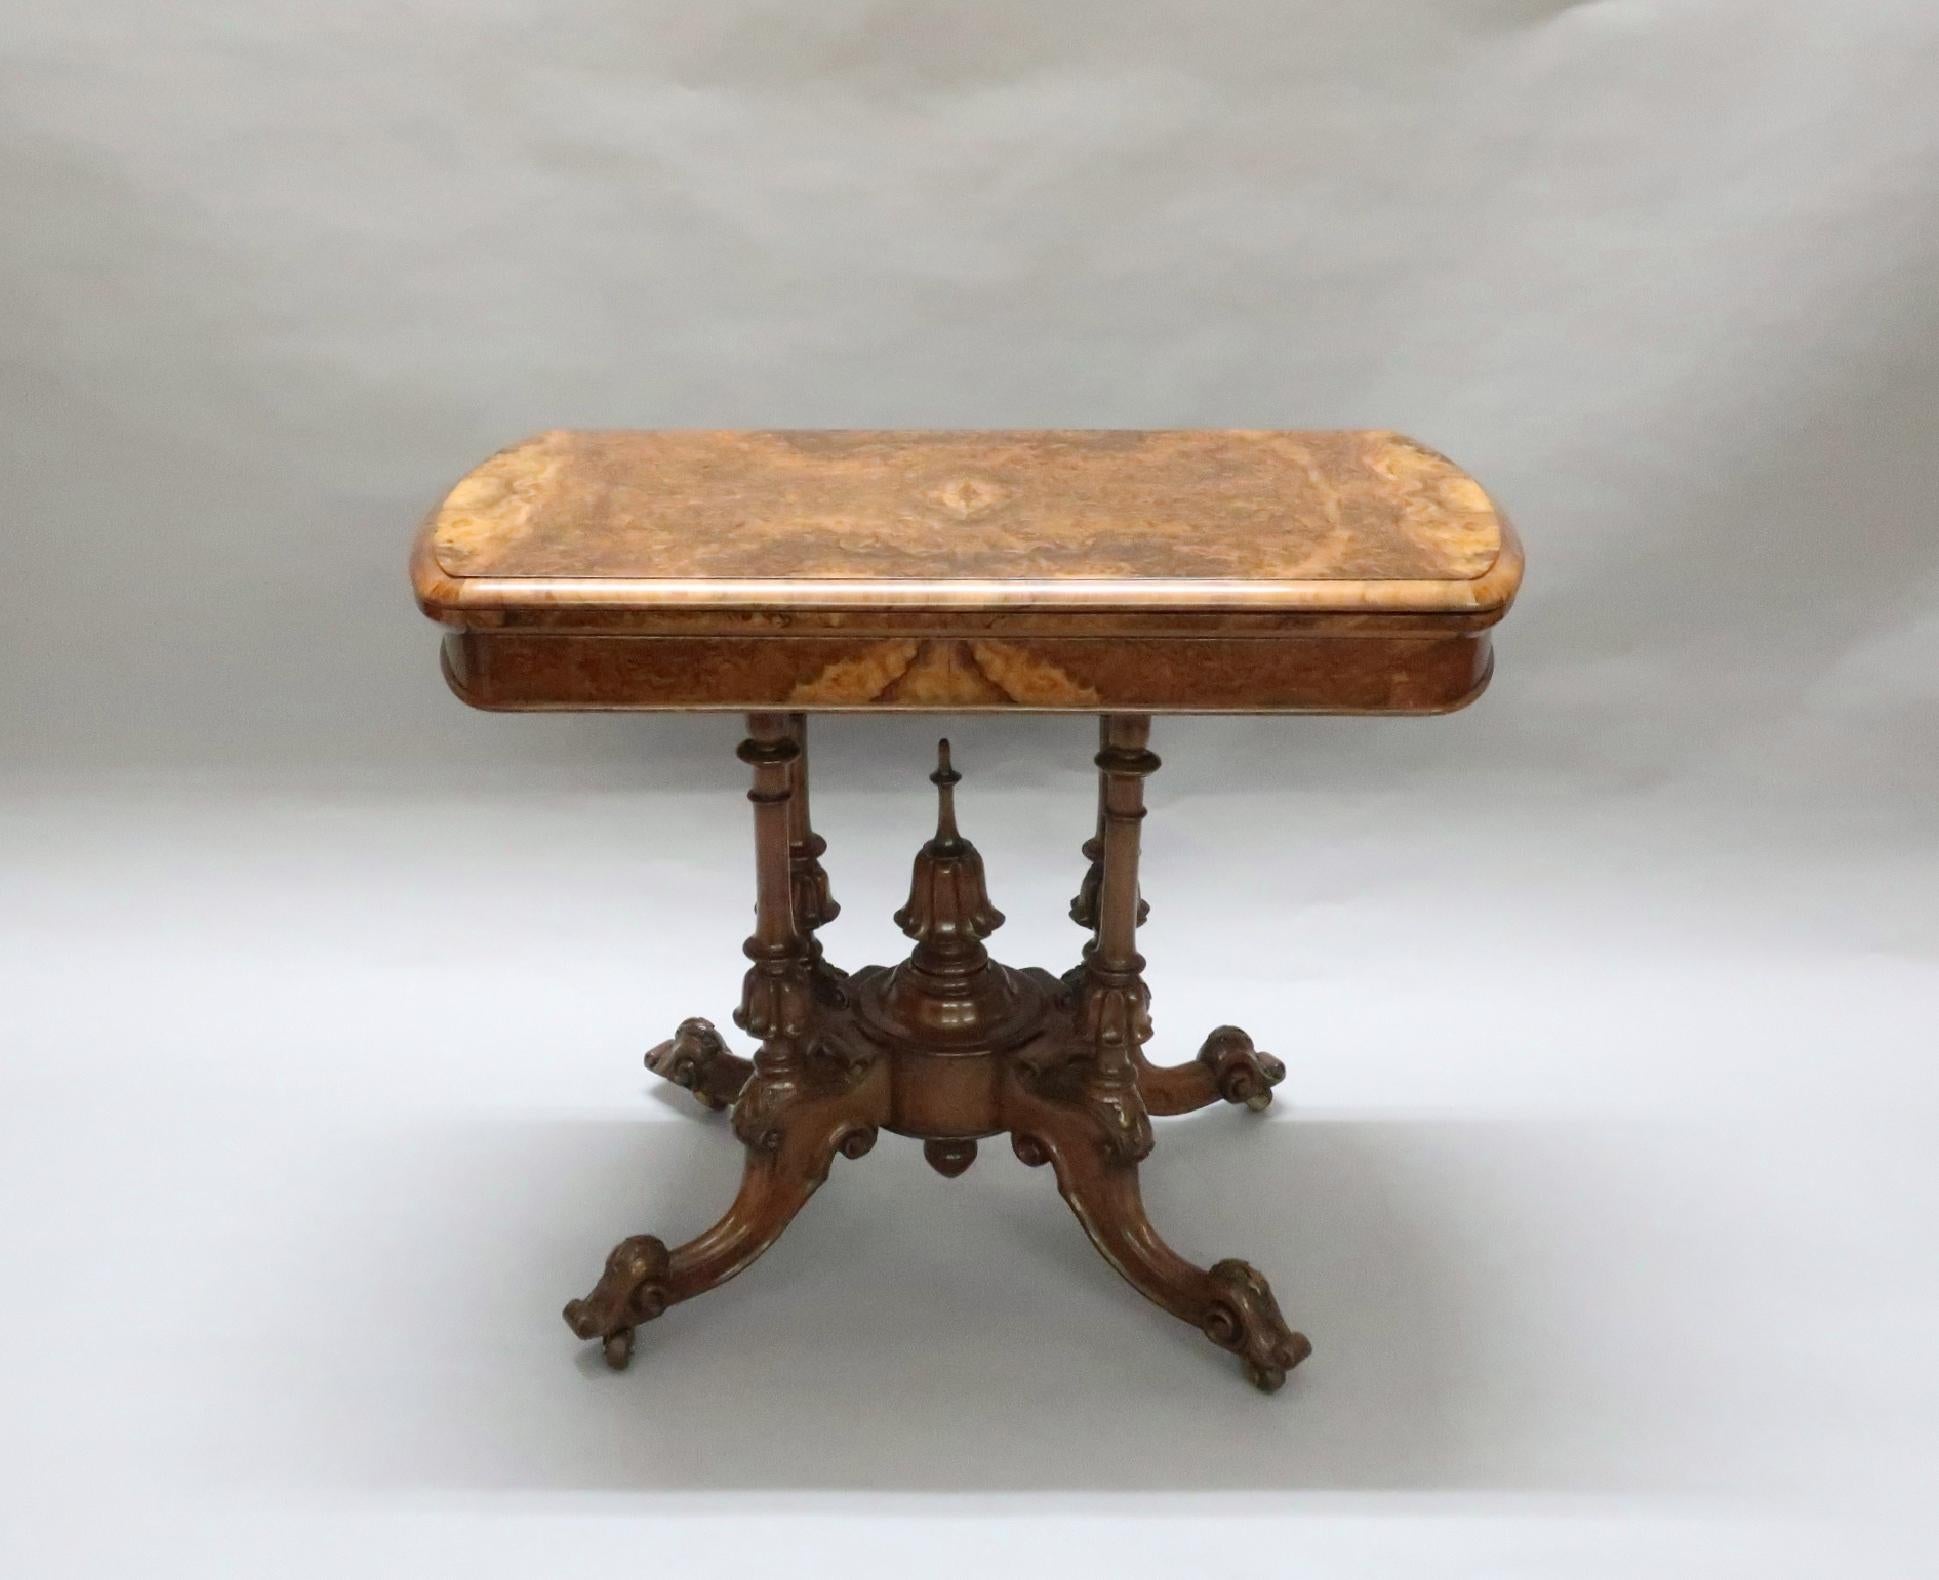 An extremely fine quality Victorian burr walnut fold over games, side or occasional table. The table base is on four turned central columns with tulip flower head carvings to the bottom, the legs are finished with scroll carvings and a central tulip